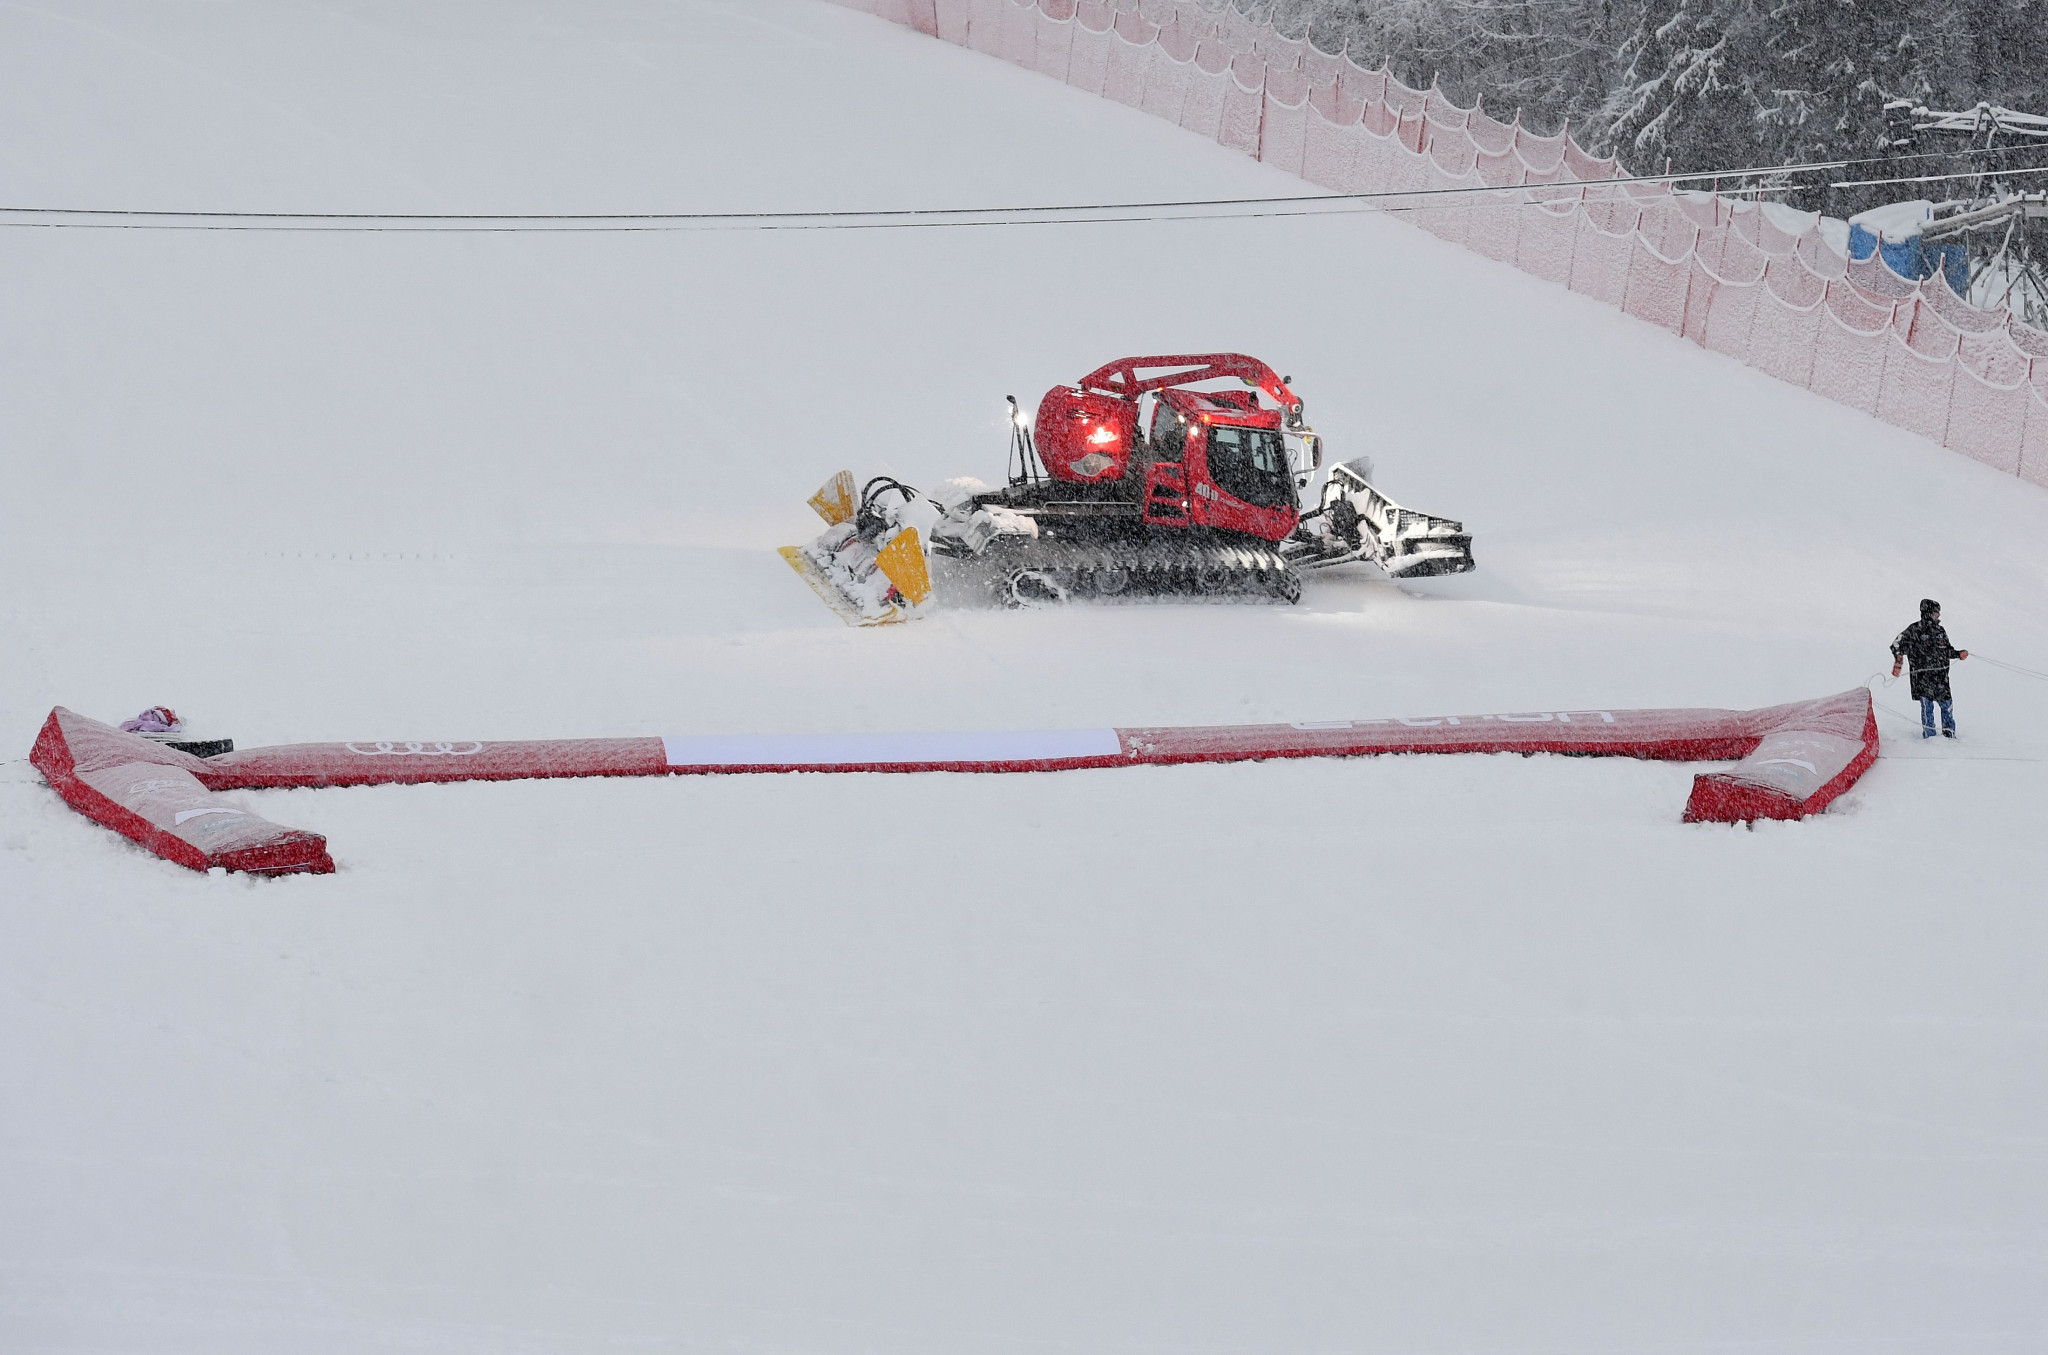 Organisers said the over 30 centimetres of snow fell on the top of the course in the German resort ©Getty Images